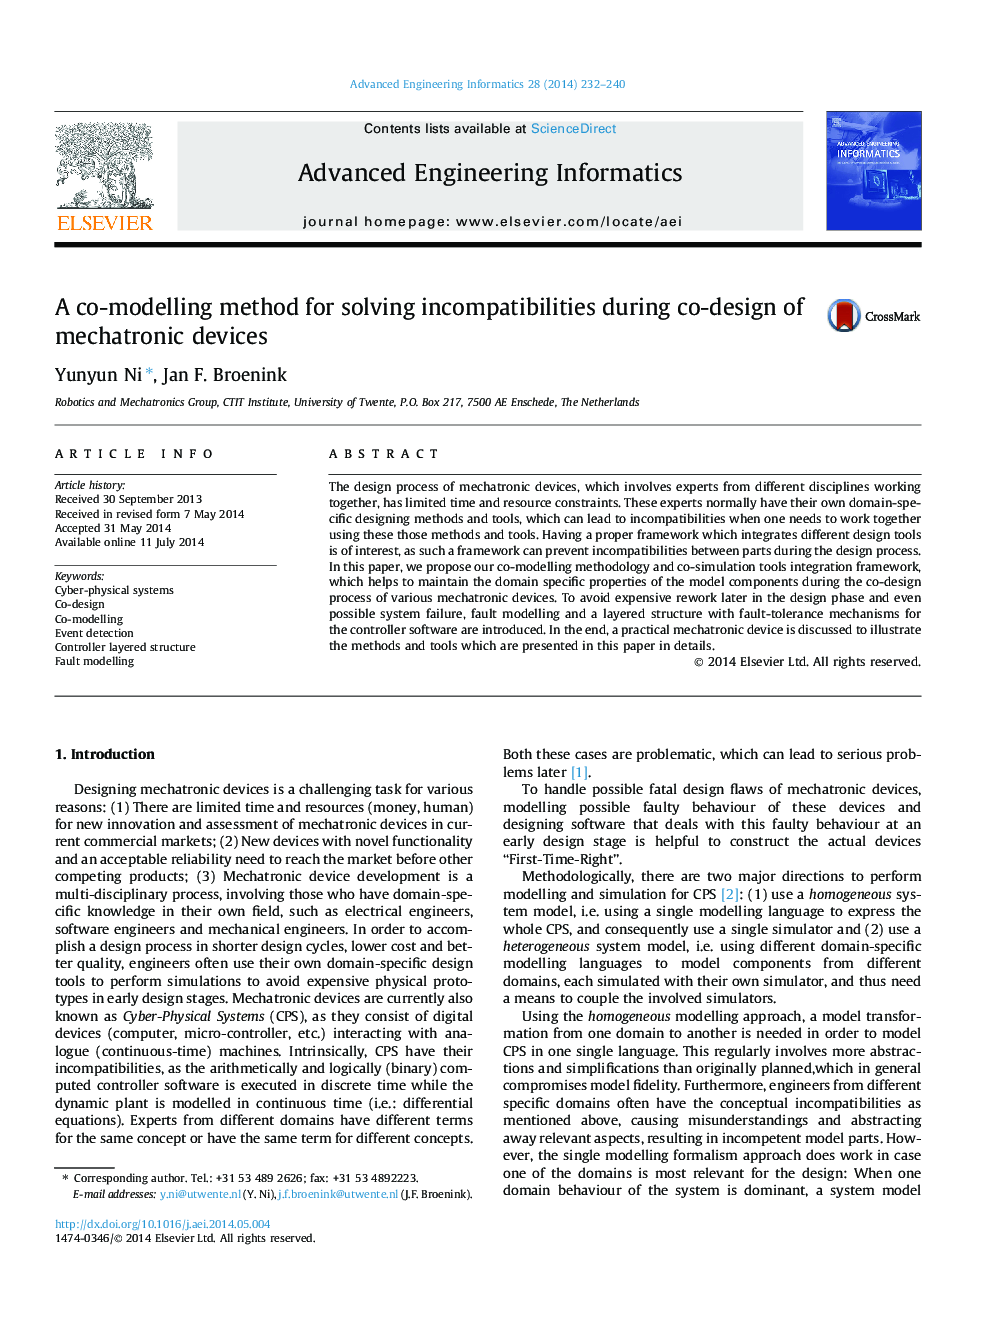 A co-modelling method for solving incompatibilities during co-design of mechatronic devices